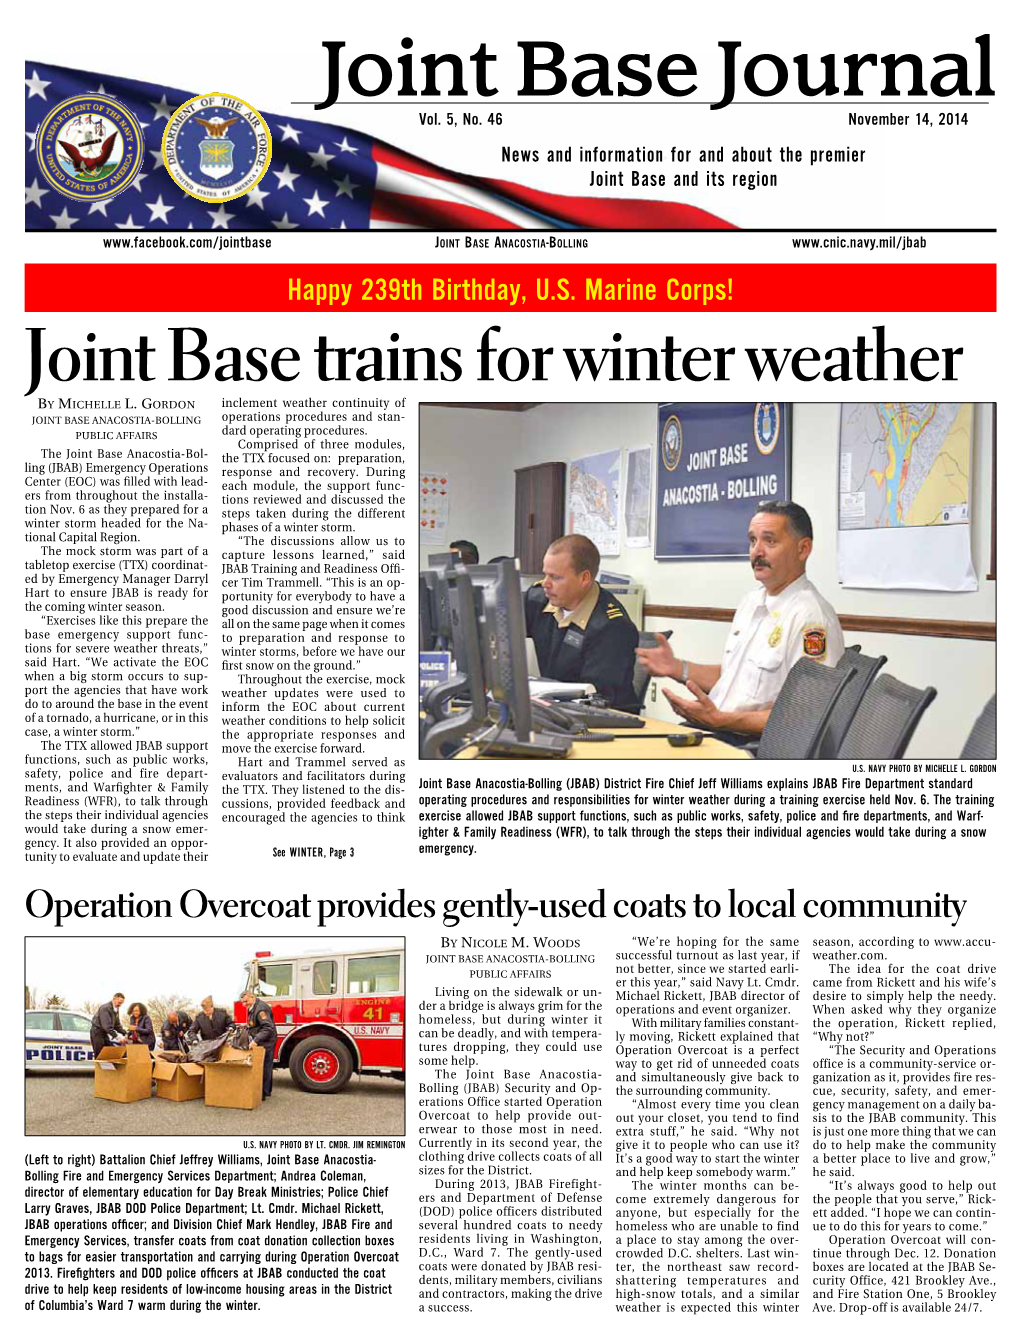 Joint Base Journal Vol